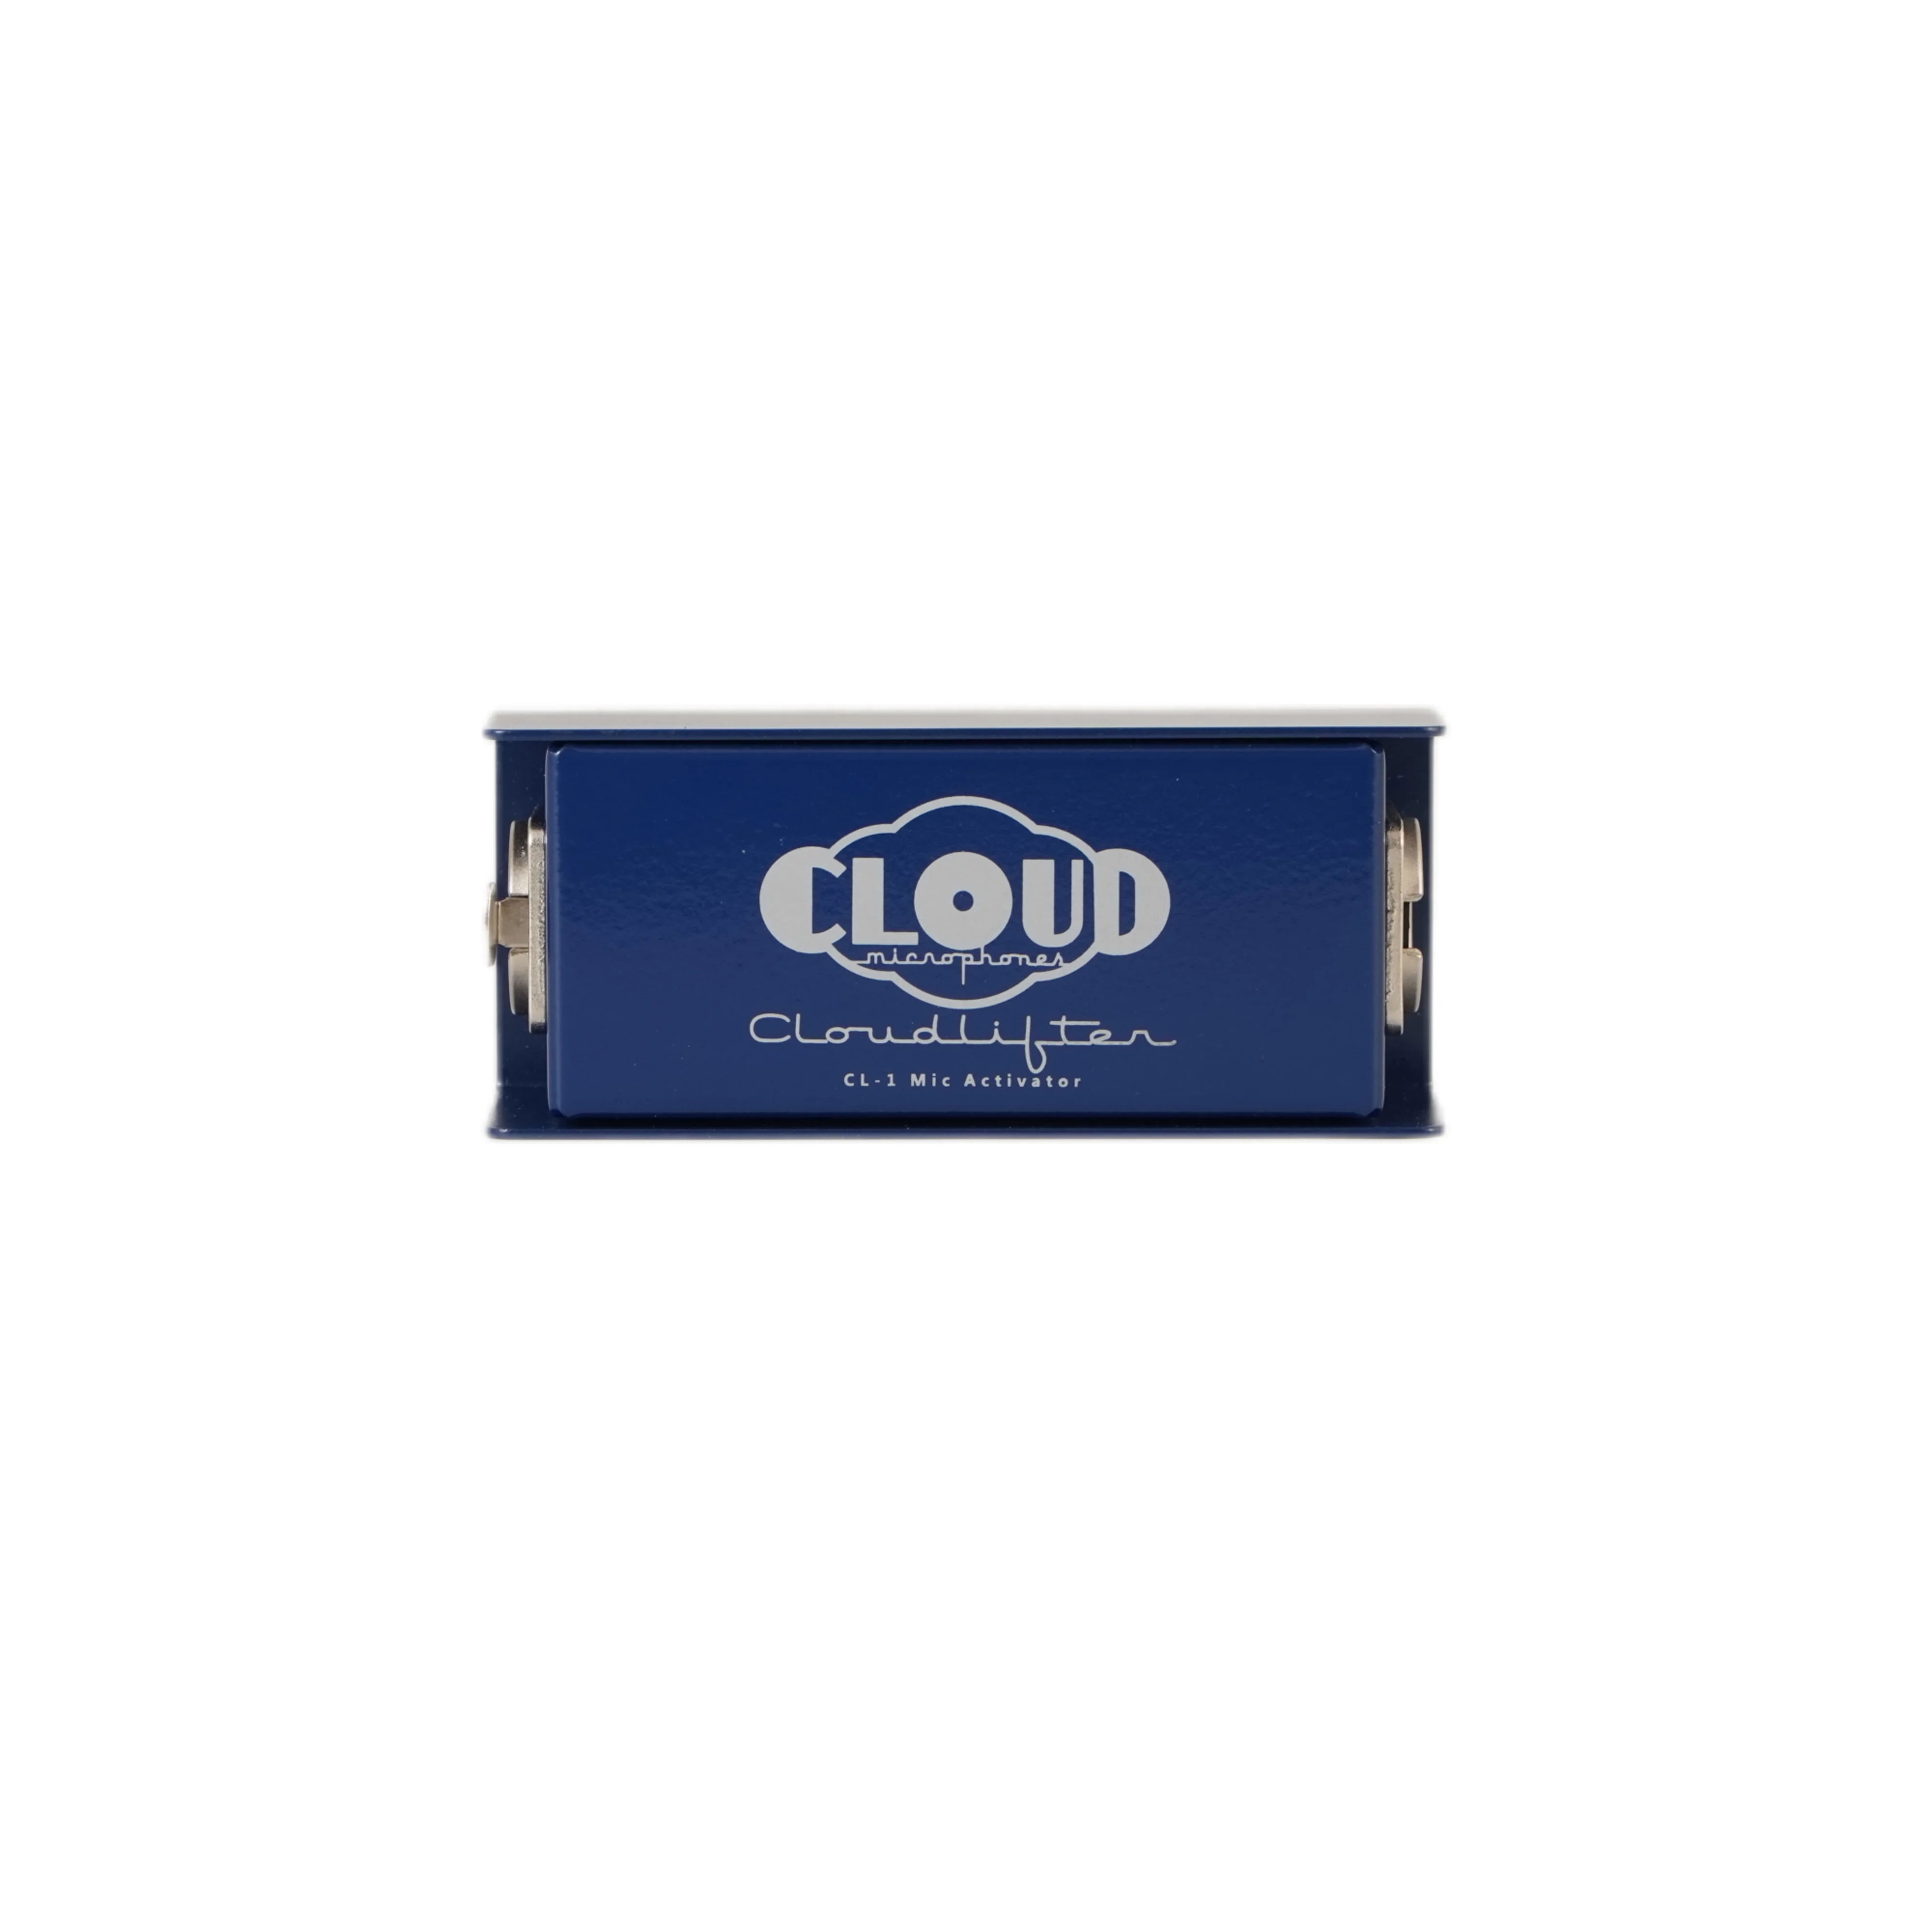 

For Cloud Microphones - Cloudlifter CL-1 Mic Activator - Ultra-Clean Microphone Preamp Gain